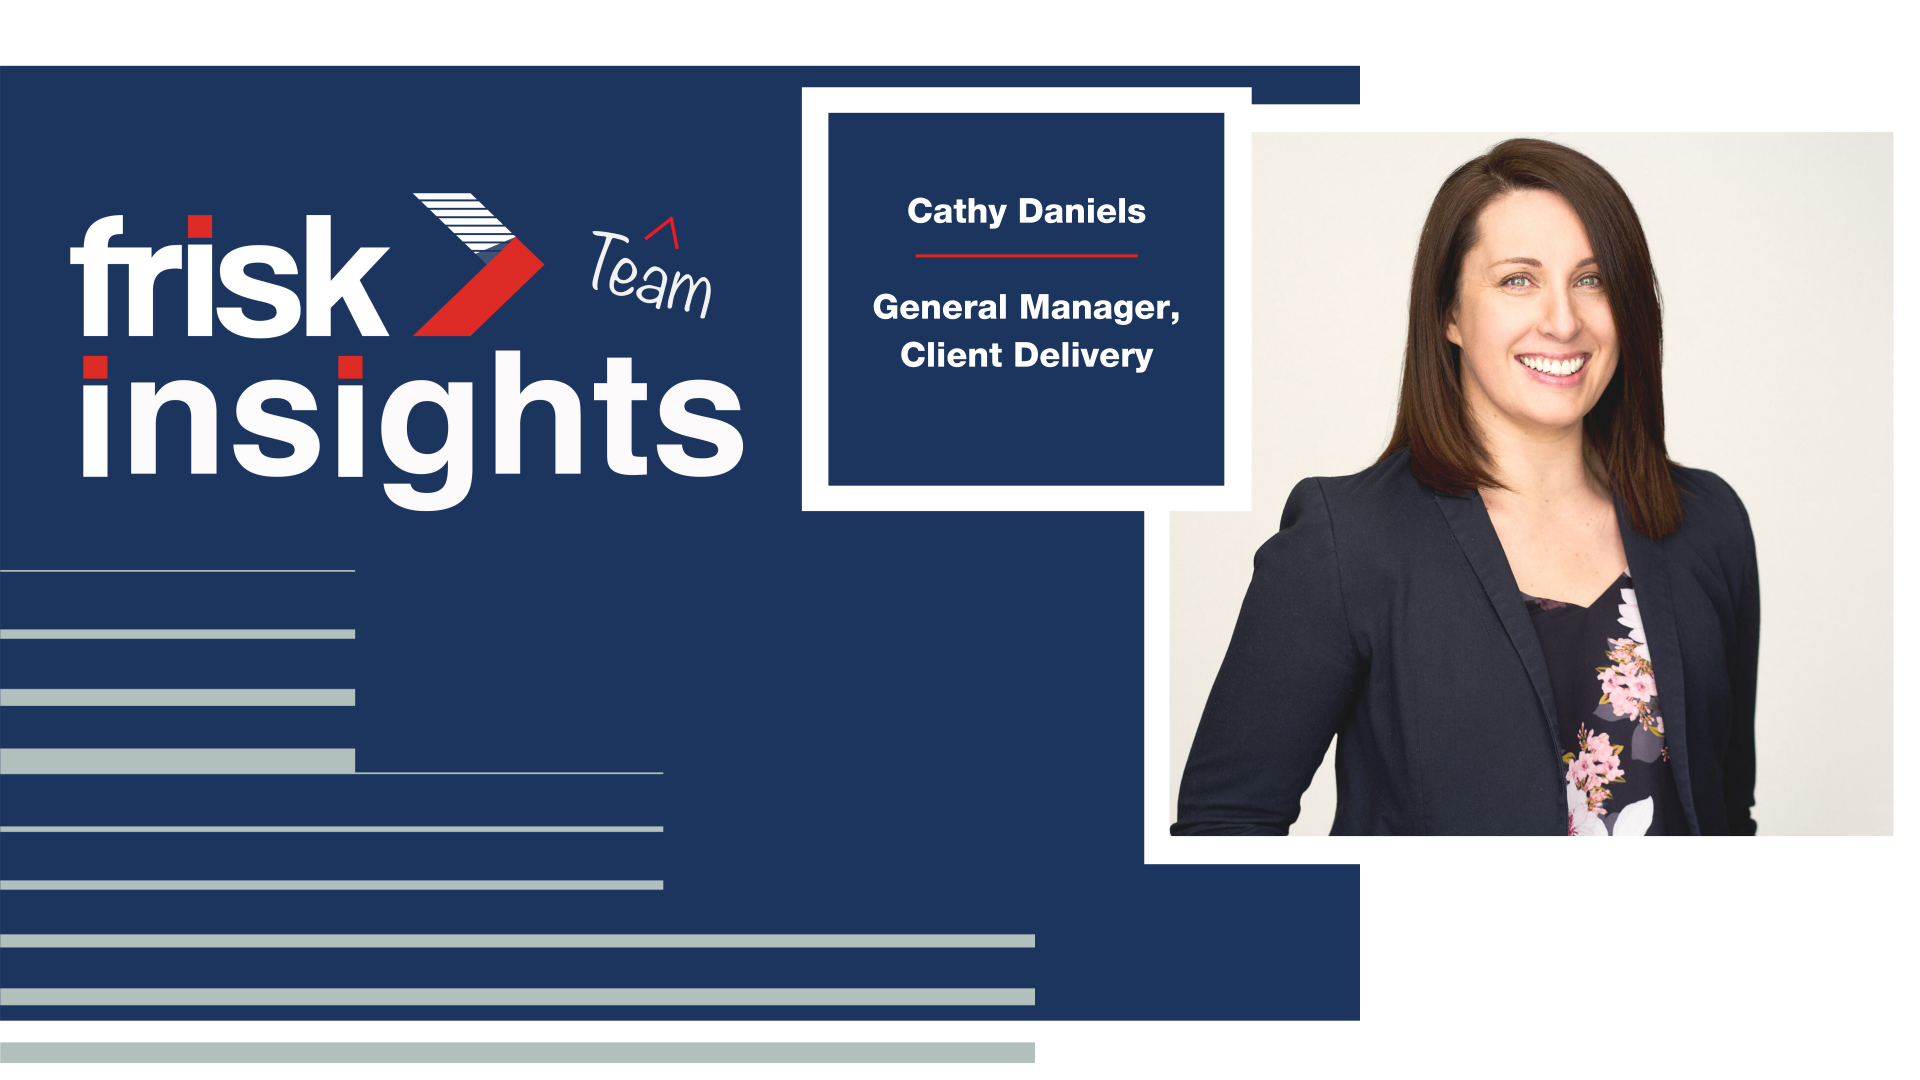 Frisk Team Insights: Cathy Daniels, General Manager, Client Delivery